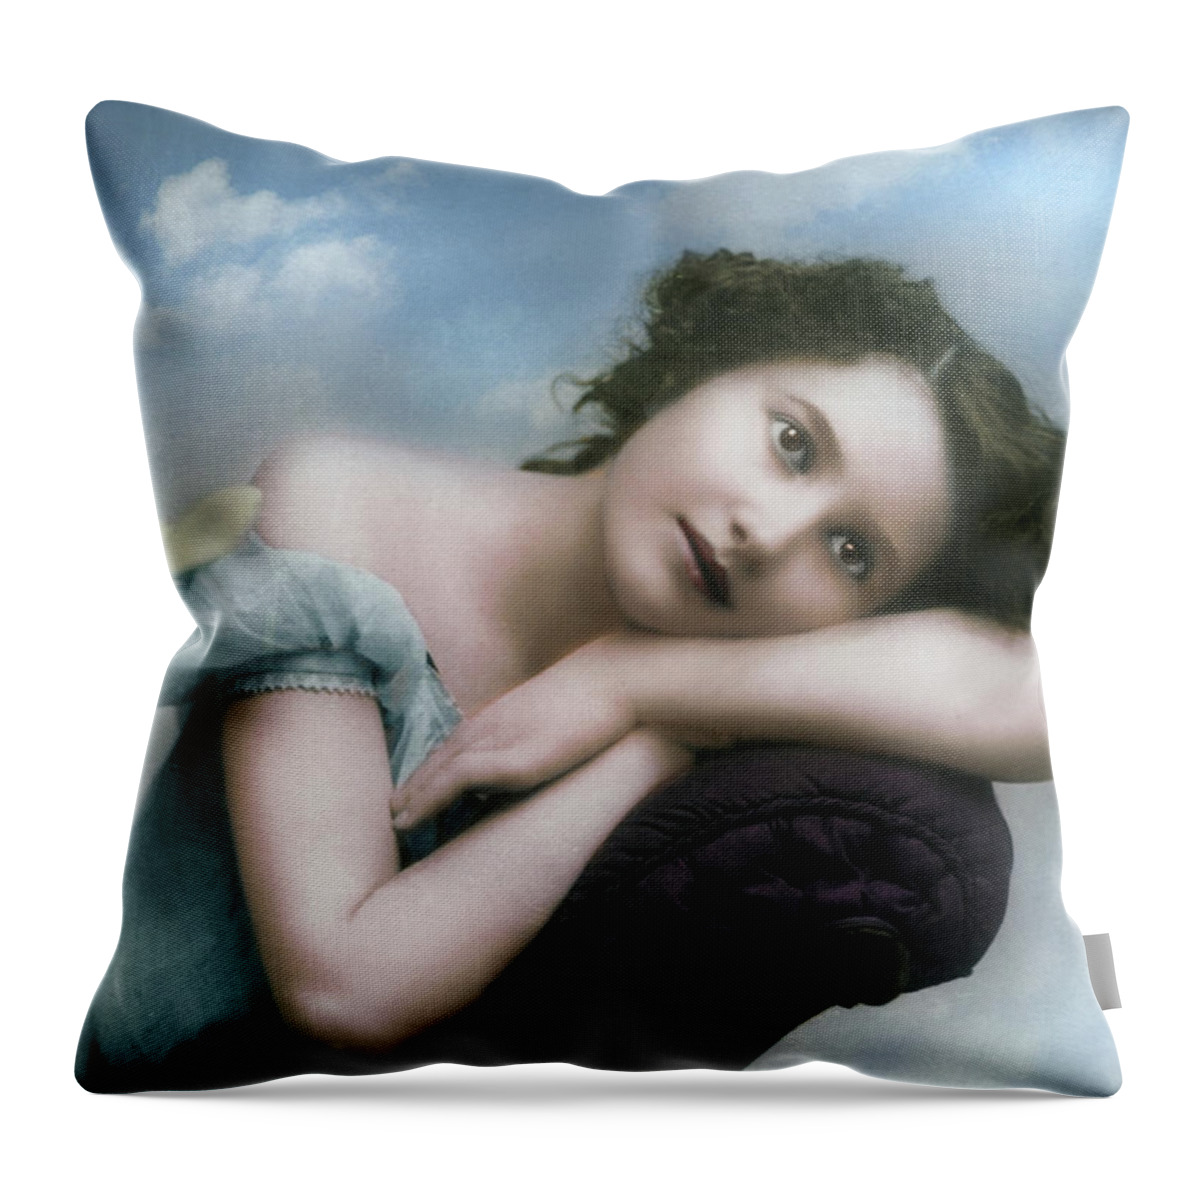 Vintage Throw Pillow featuring the mixed media Beautiful Dreamer by John Rivera